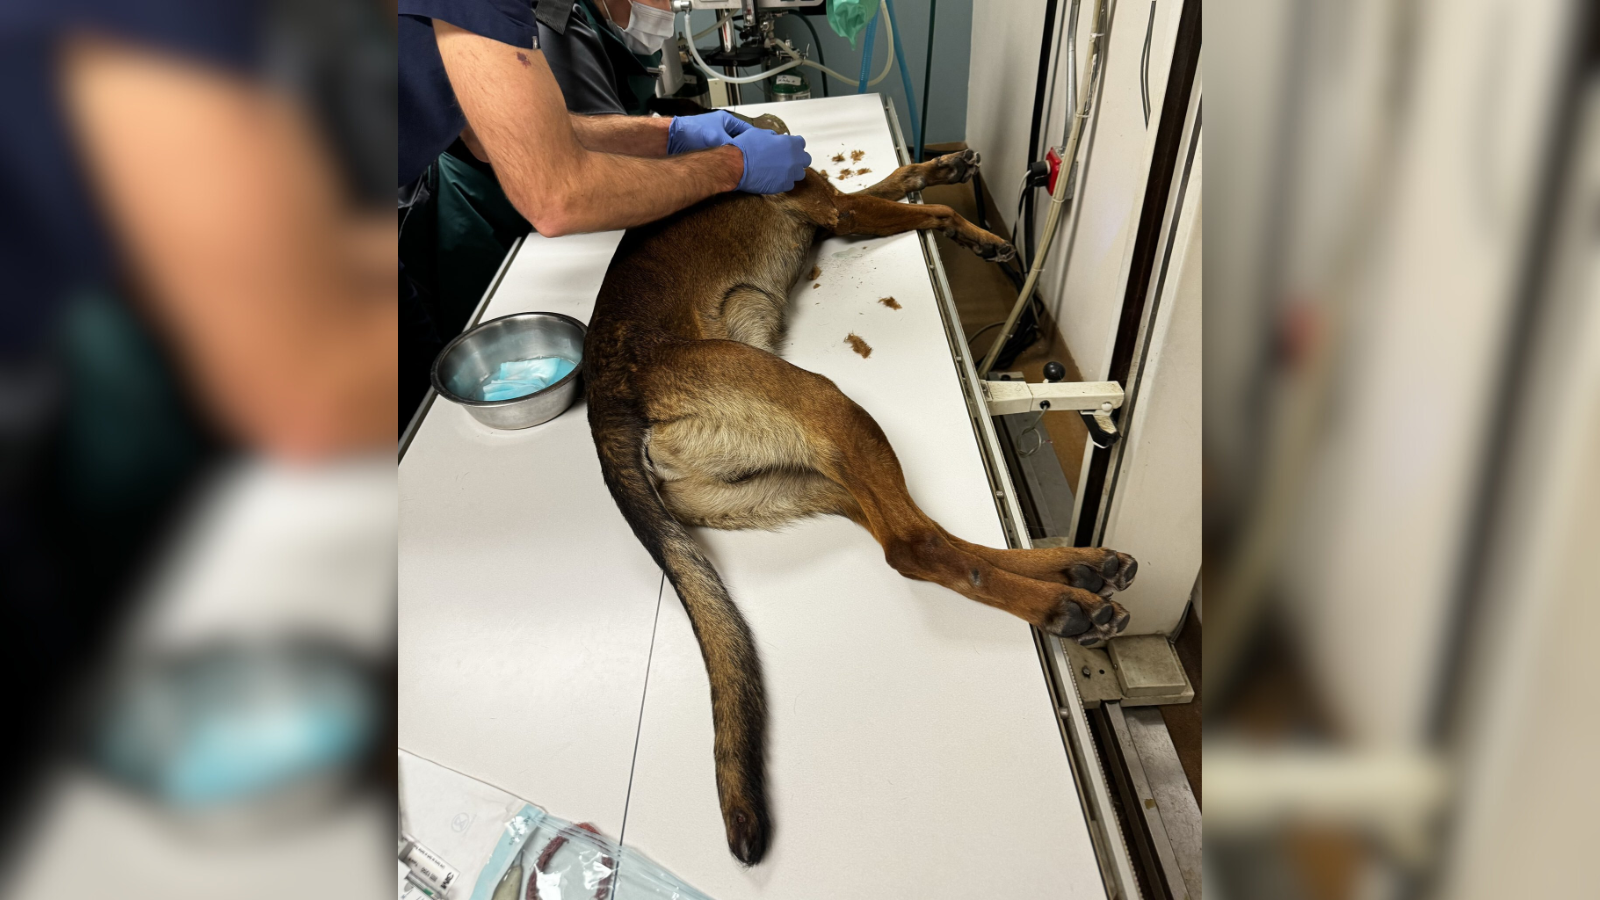 K9 Kjeld 'Kid' being treated by veterinarians after being shot by a suspect